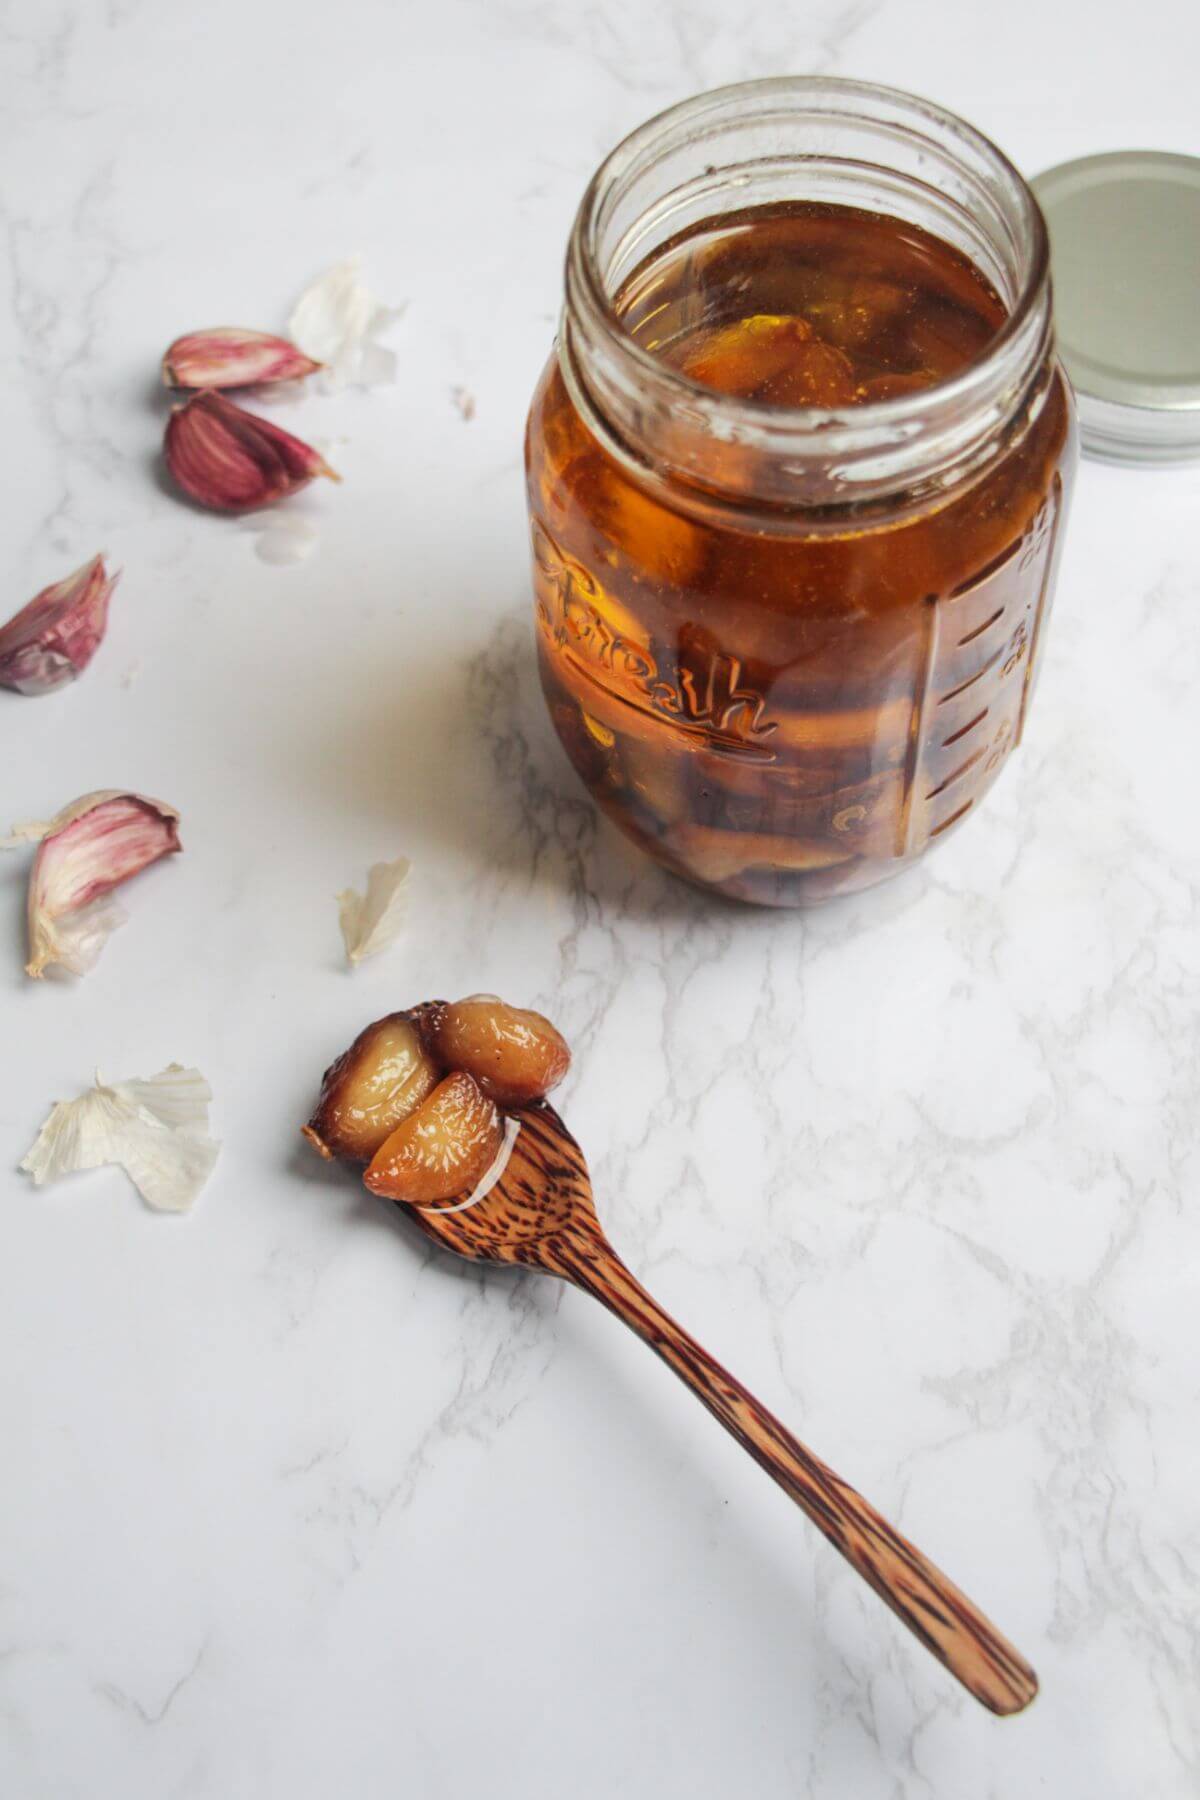 Garlic confit cloves on a wooden spoon on a white marble background, with a jar of garlic confit behind.